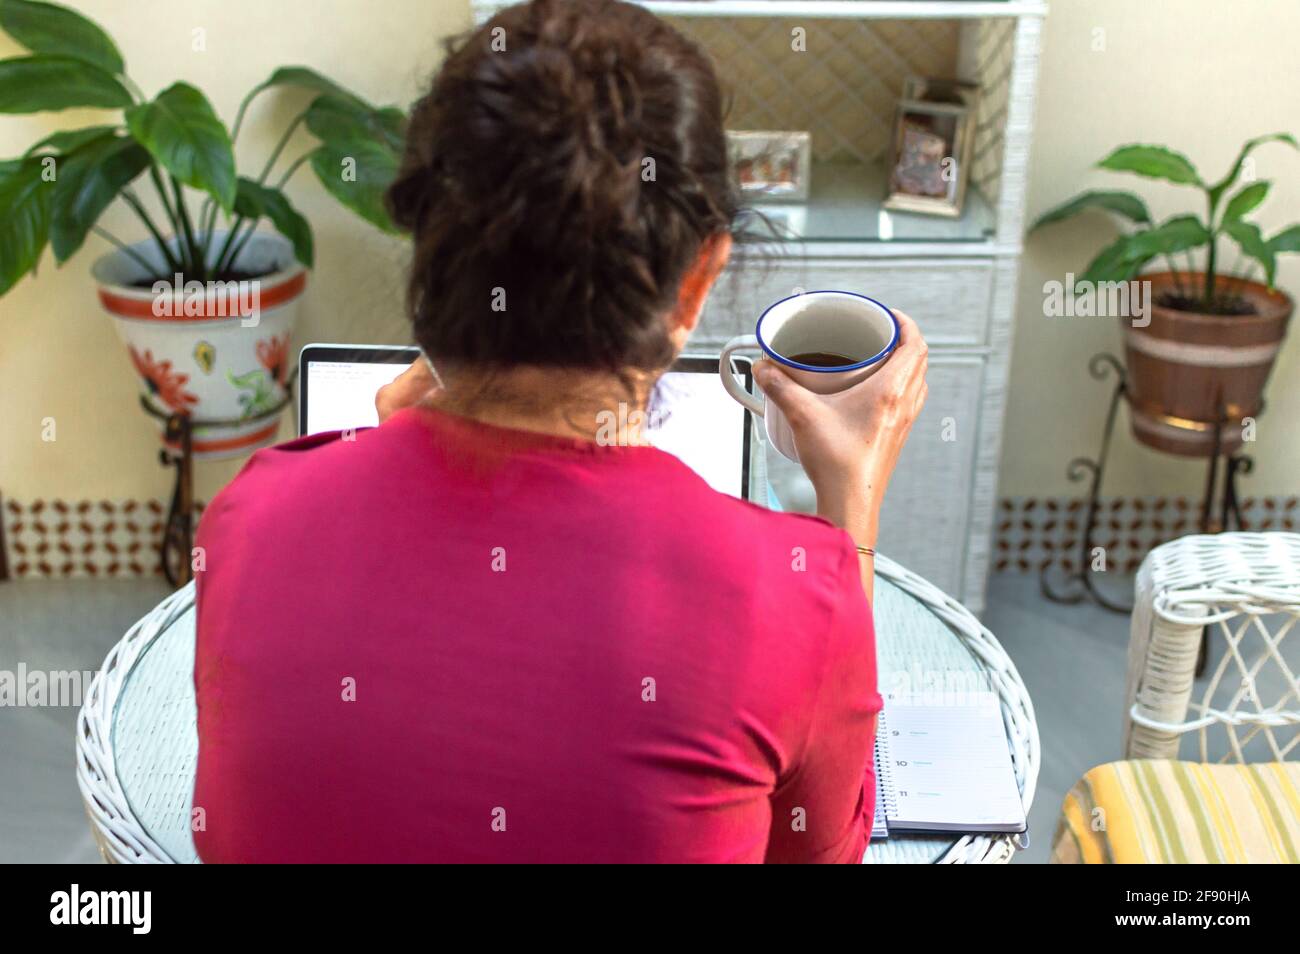 Back view of woman using a laptop and drinking a cup of coffee in a place with plants at home. Stock Photo